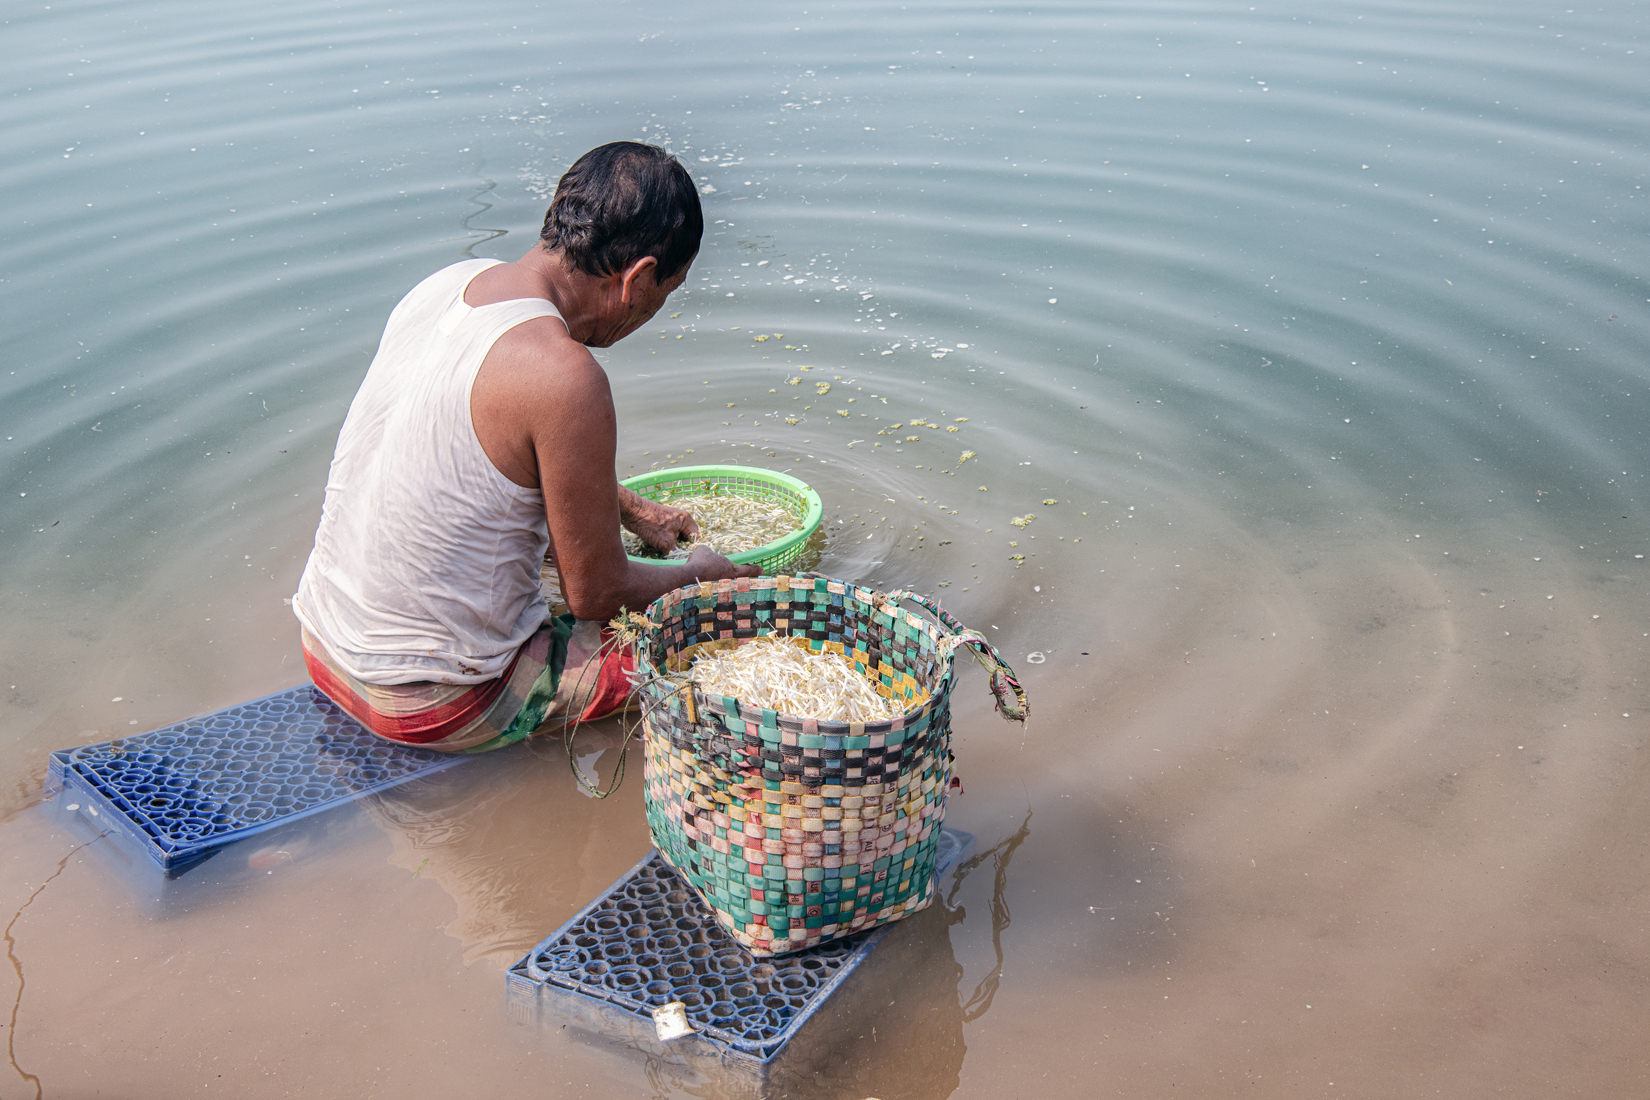 a man sitting in water with baskets of food